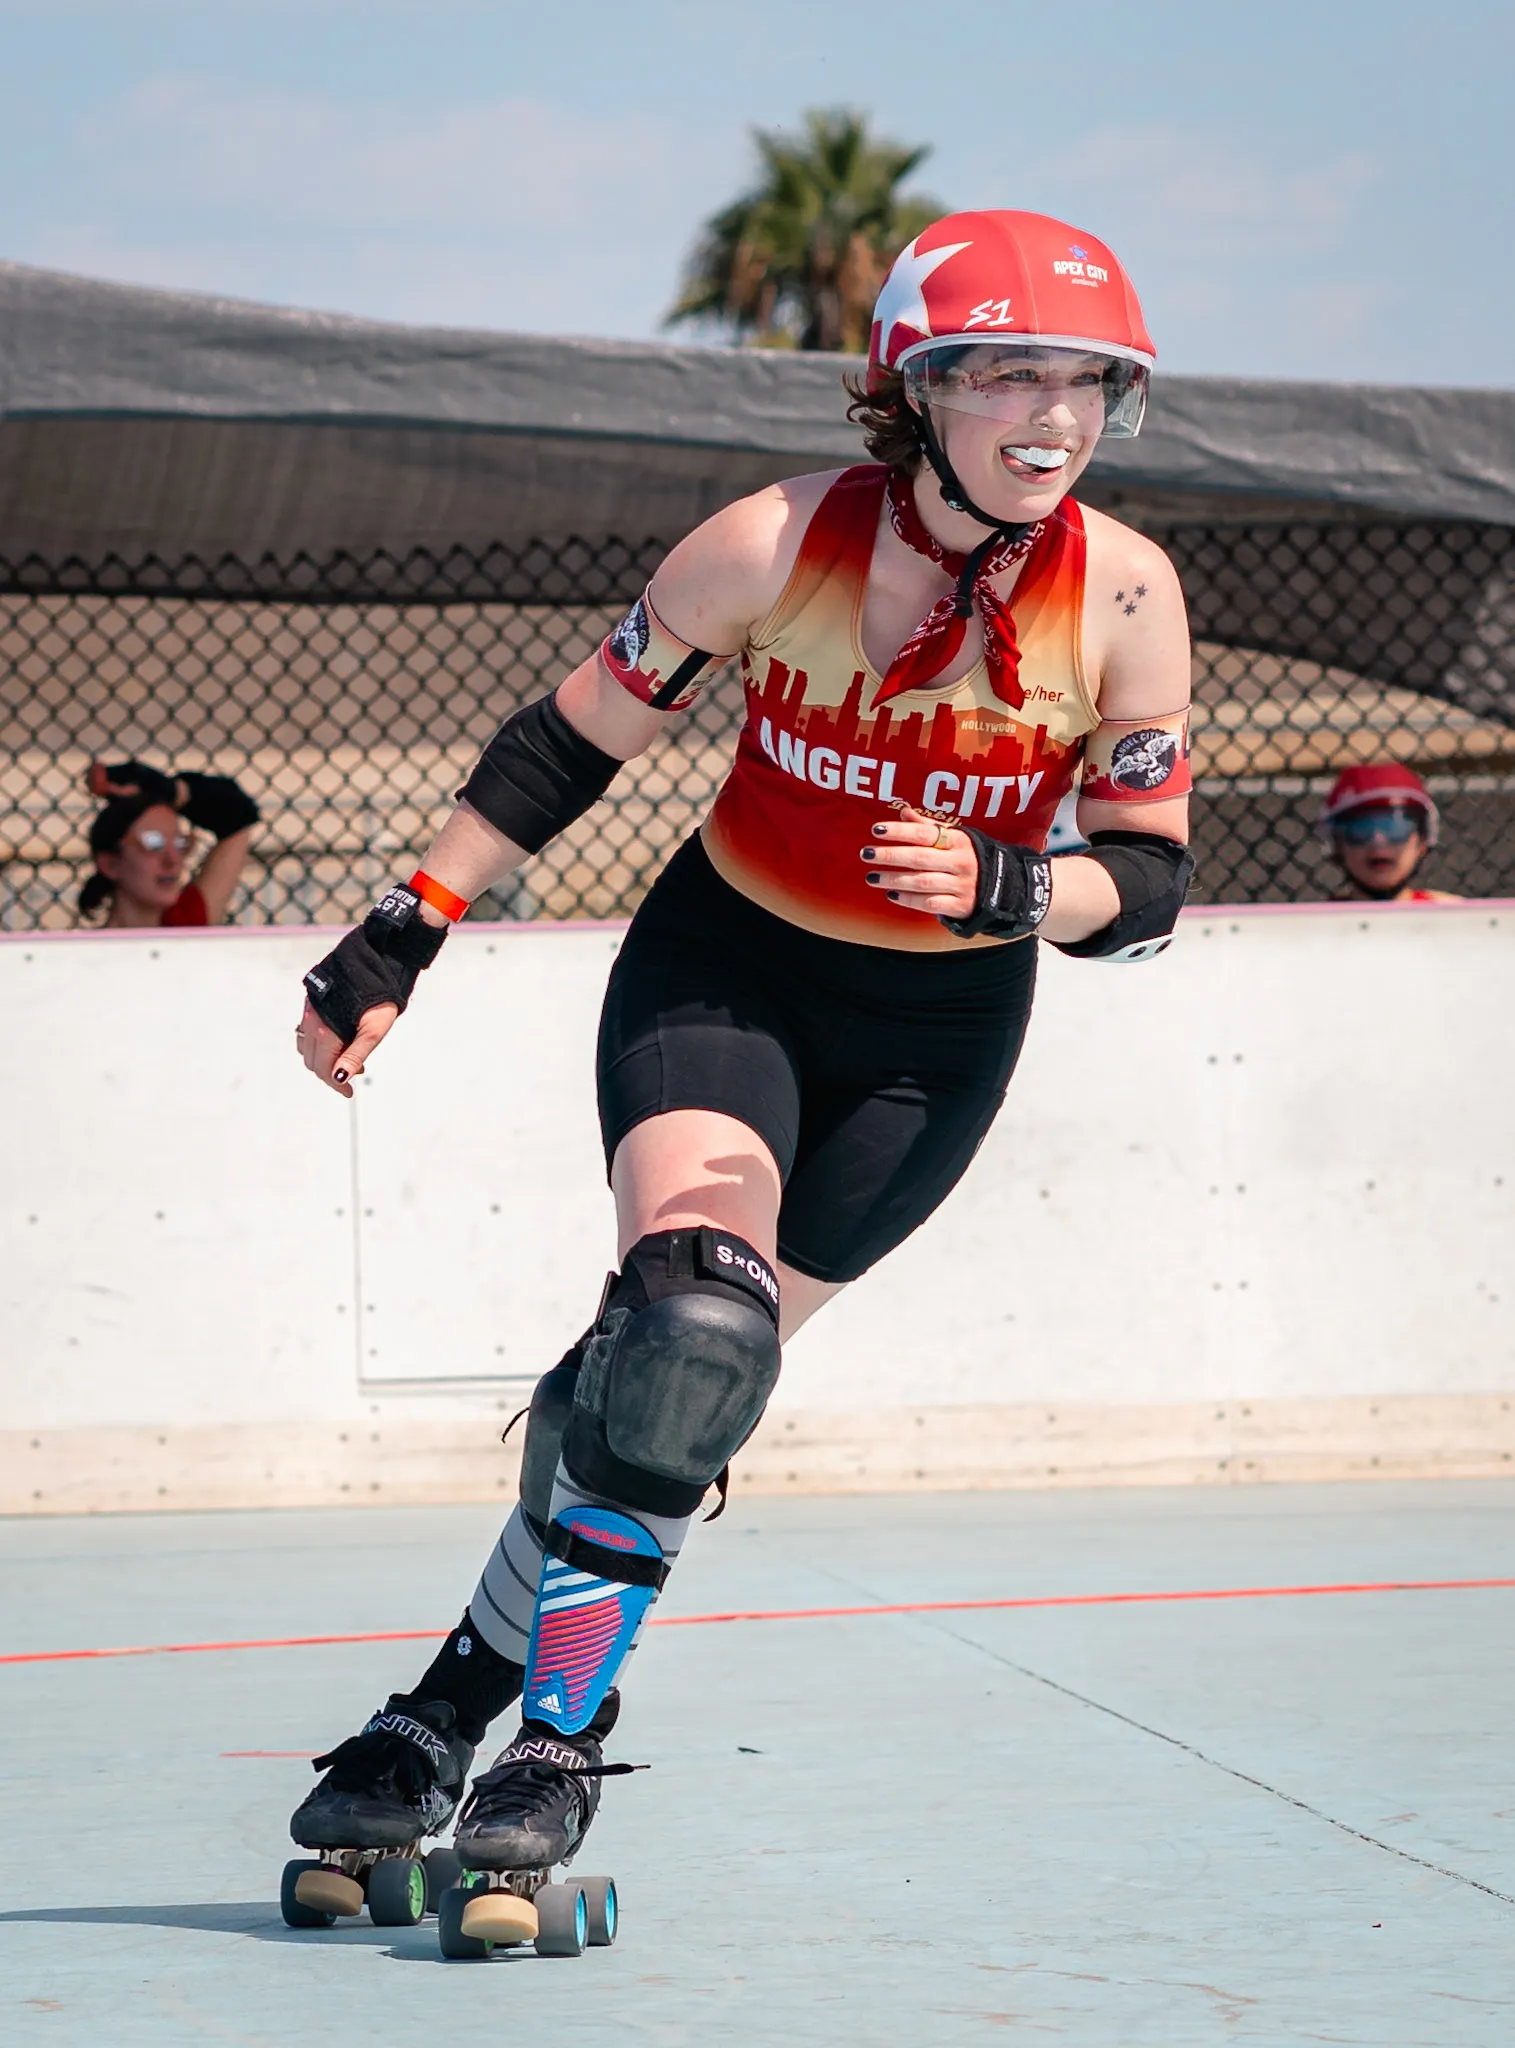 I'm rounding the corner of a roller derby track. I have a mischievous grin.